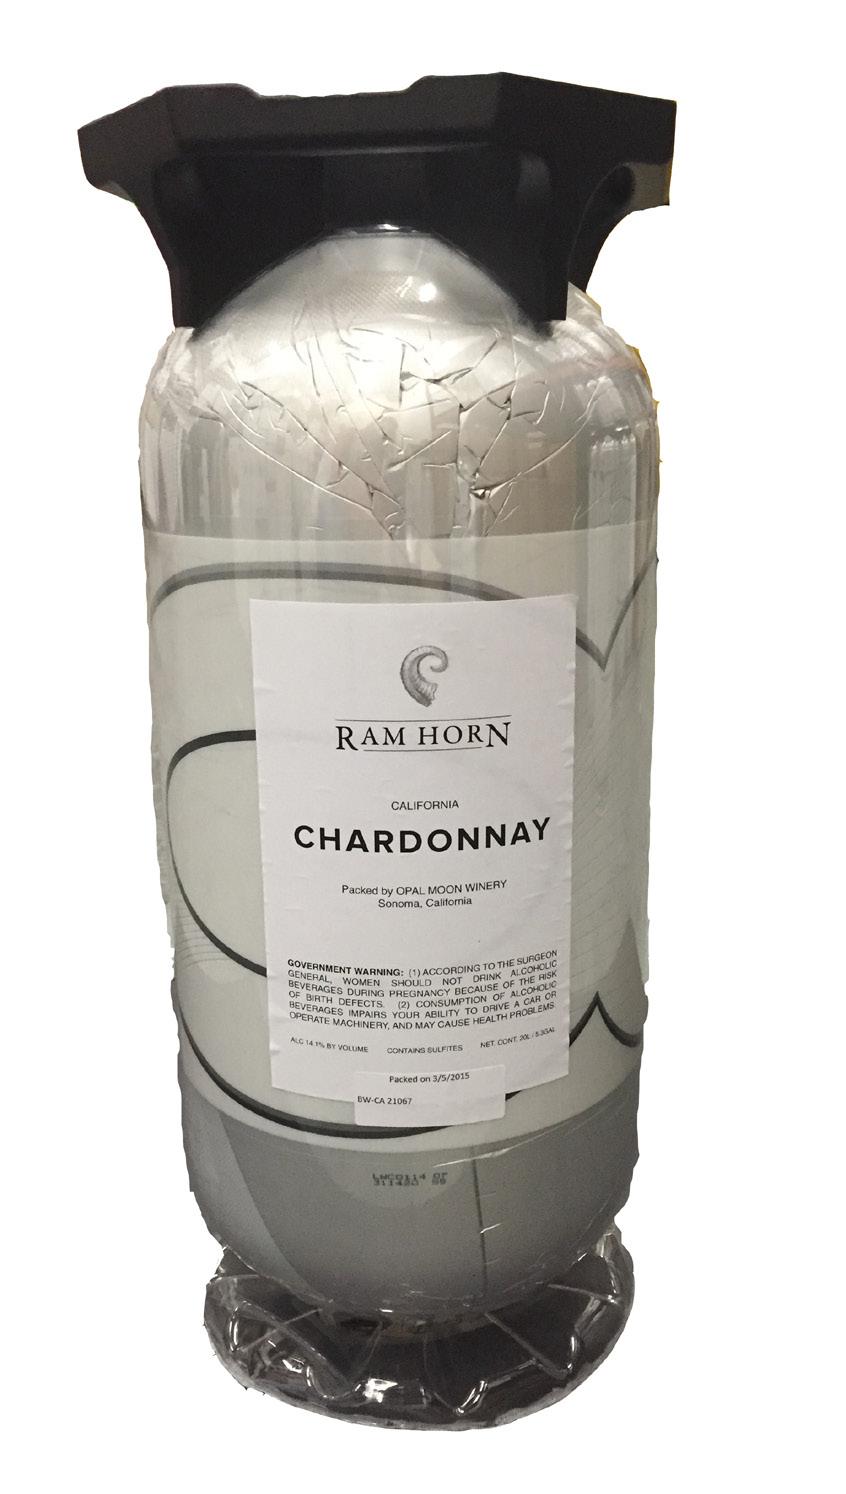 2012 Ram Horn Chardonnay WINERY: Produced by Opan Moon Winery, the second winery of the Bonneau family winemakers -- a third generation of Bonneau s with family history dating back to the early 1920s